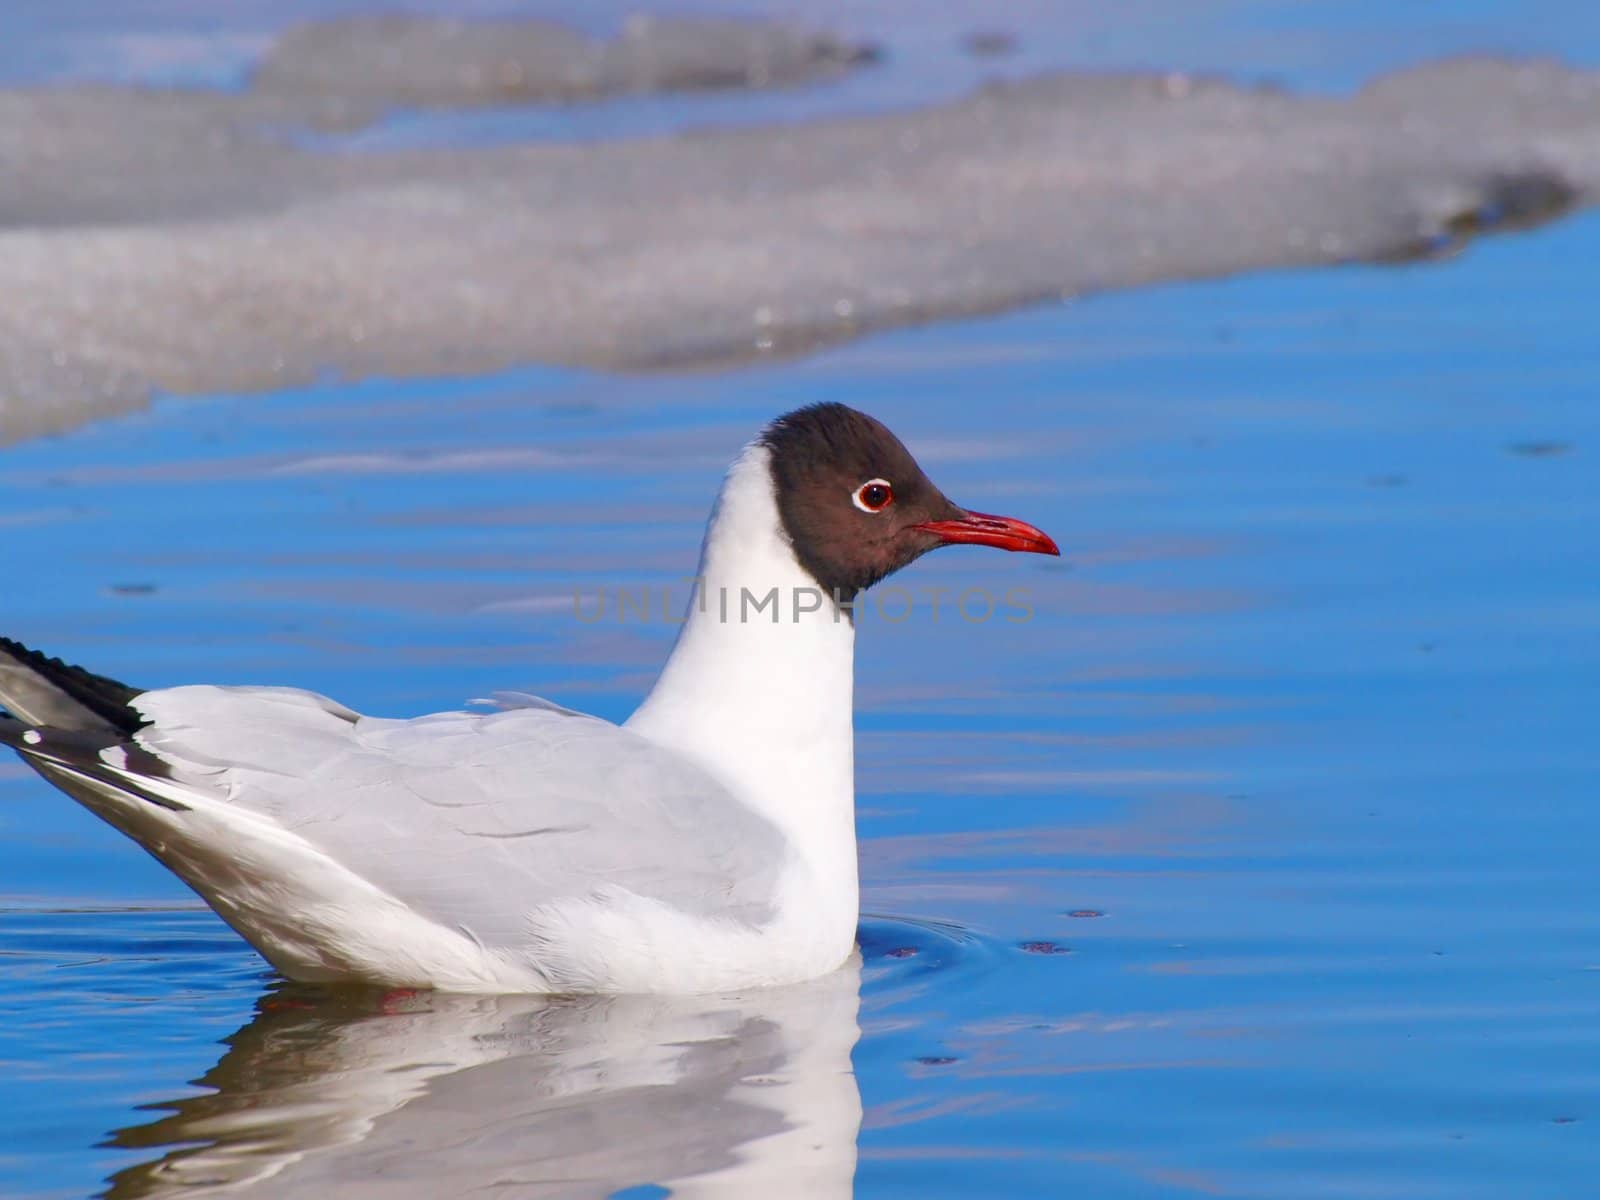 Hooded seagull swimming in clear blue water with some ice in the back at spring